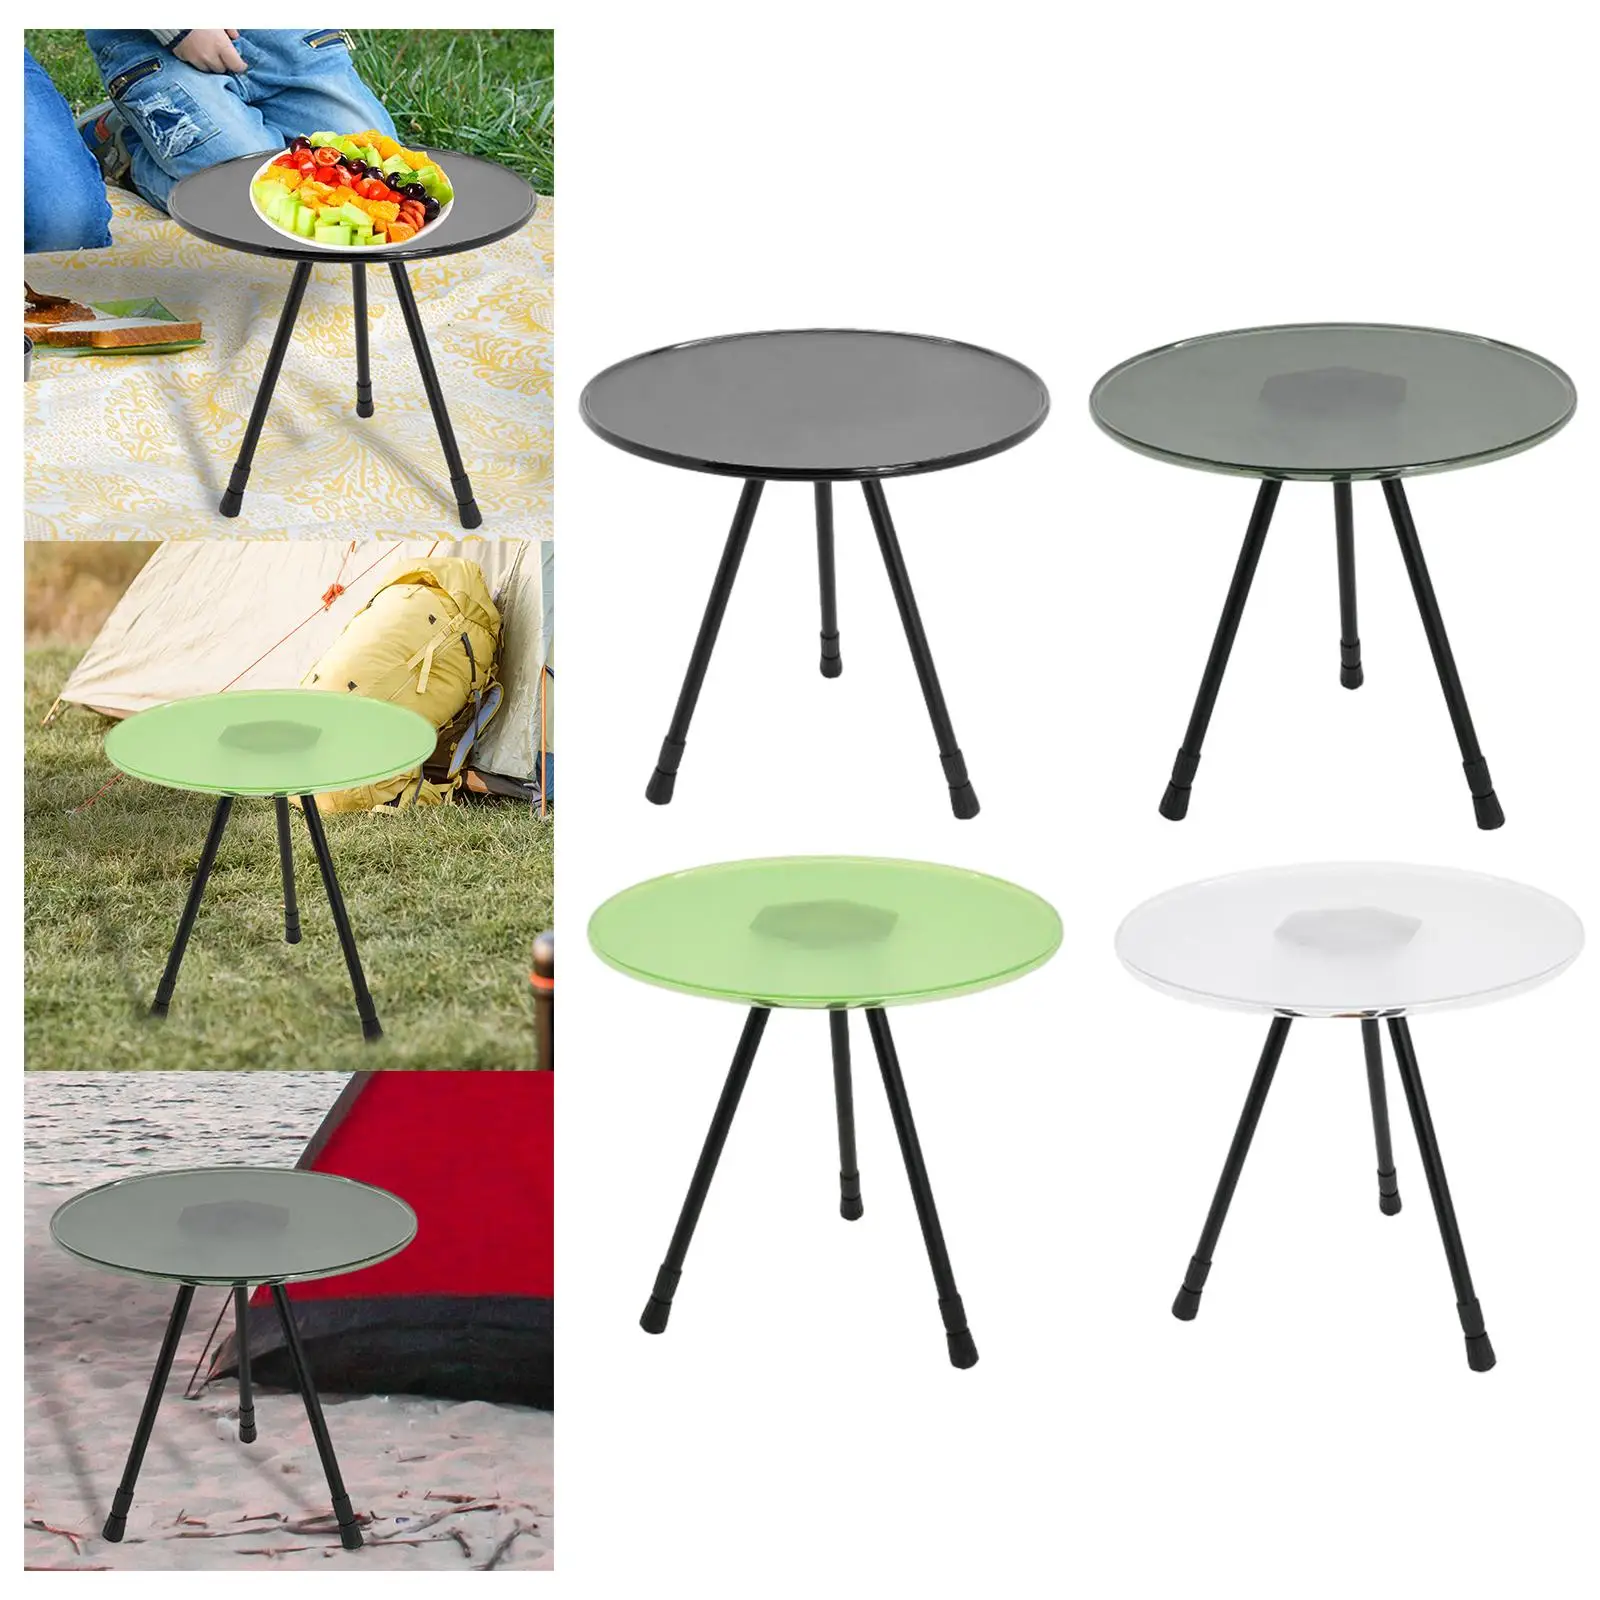 Three Legged Round Table Folding Adjustable Outdoor Stable Stable Lightweight Durable Retractable for Picnic Party Beach Fishing